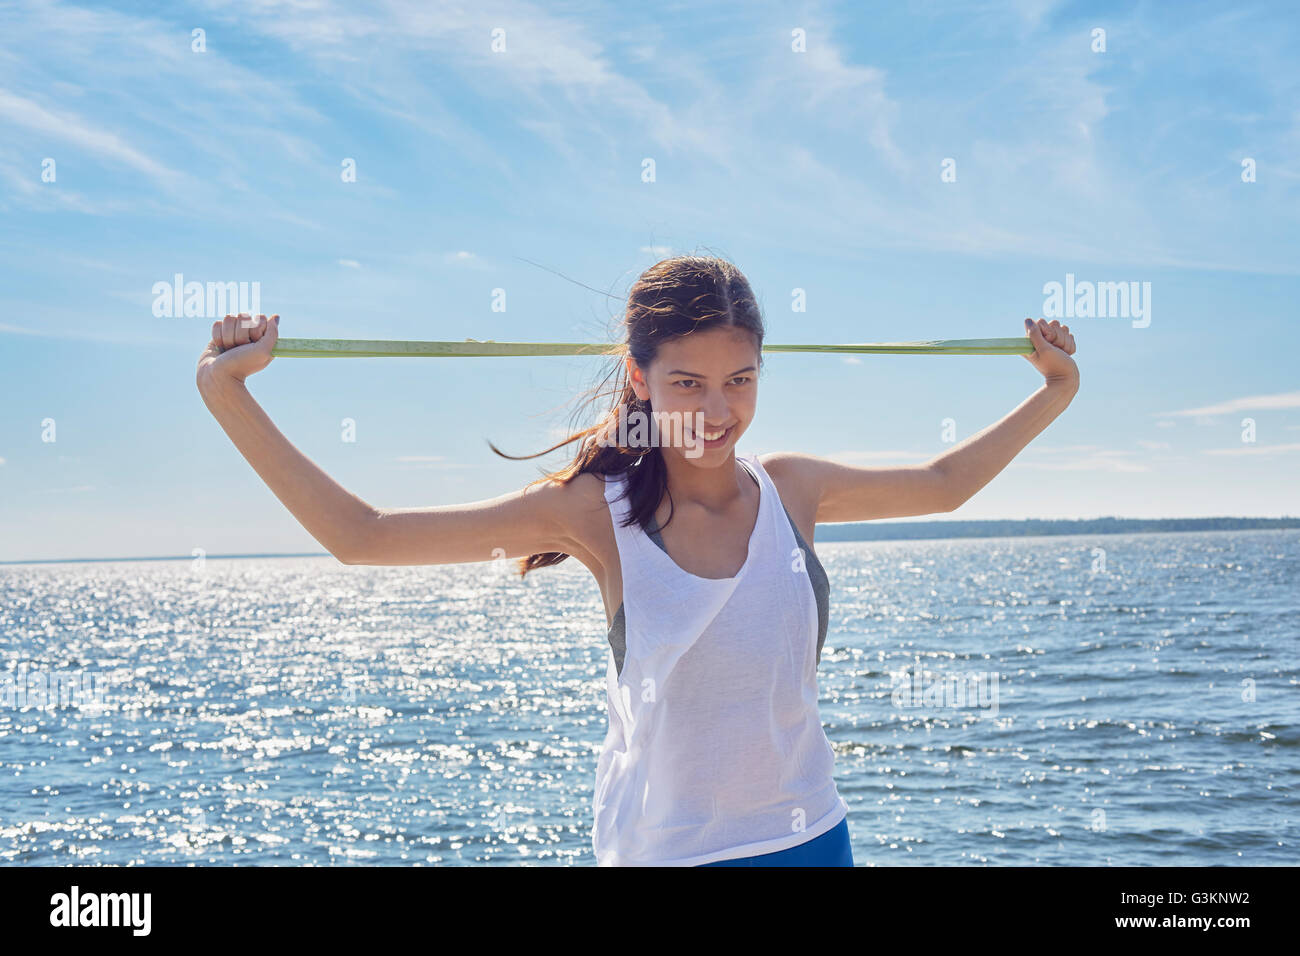 Woman in front of ocean holding resistance band looking at camera smiling Stock Photo